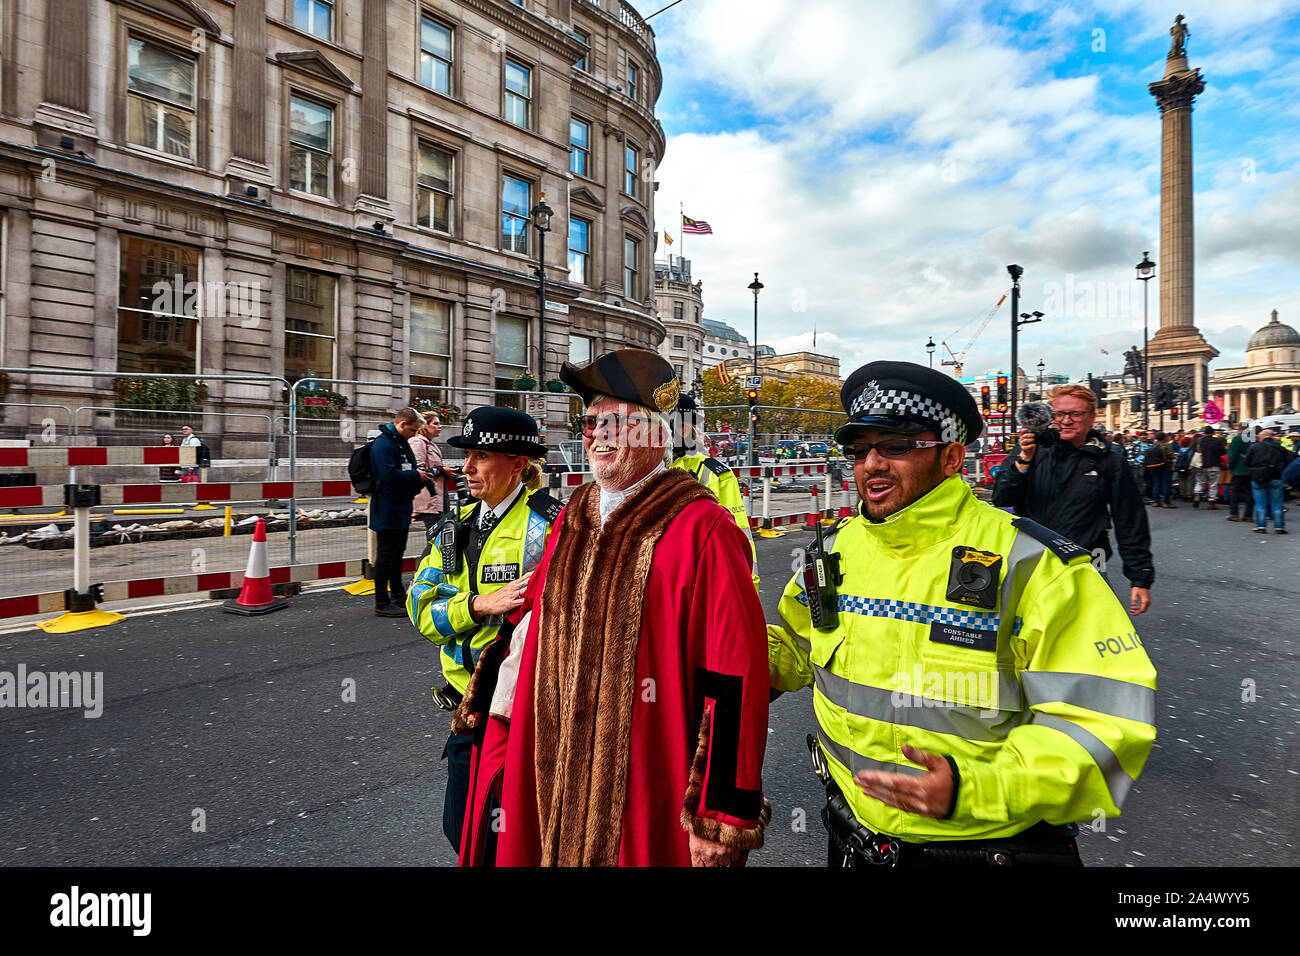 London, U.K. - Oct 16, 2019: Woodbridge mayor and Green Party member Eamonn O'Nolan, dressed in civic robes, is led away by Police after being arrested for blocking a road in Trafalgar Square. Stock Photo